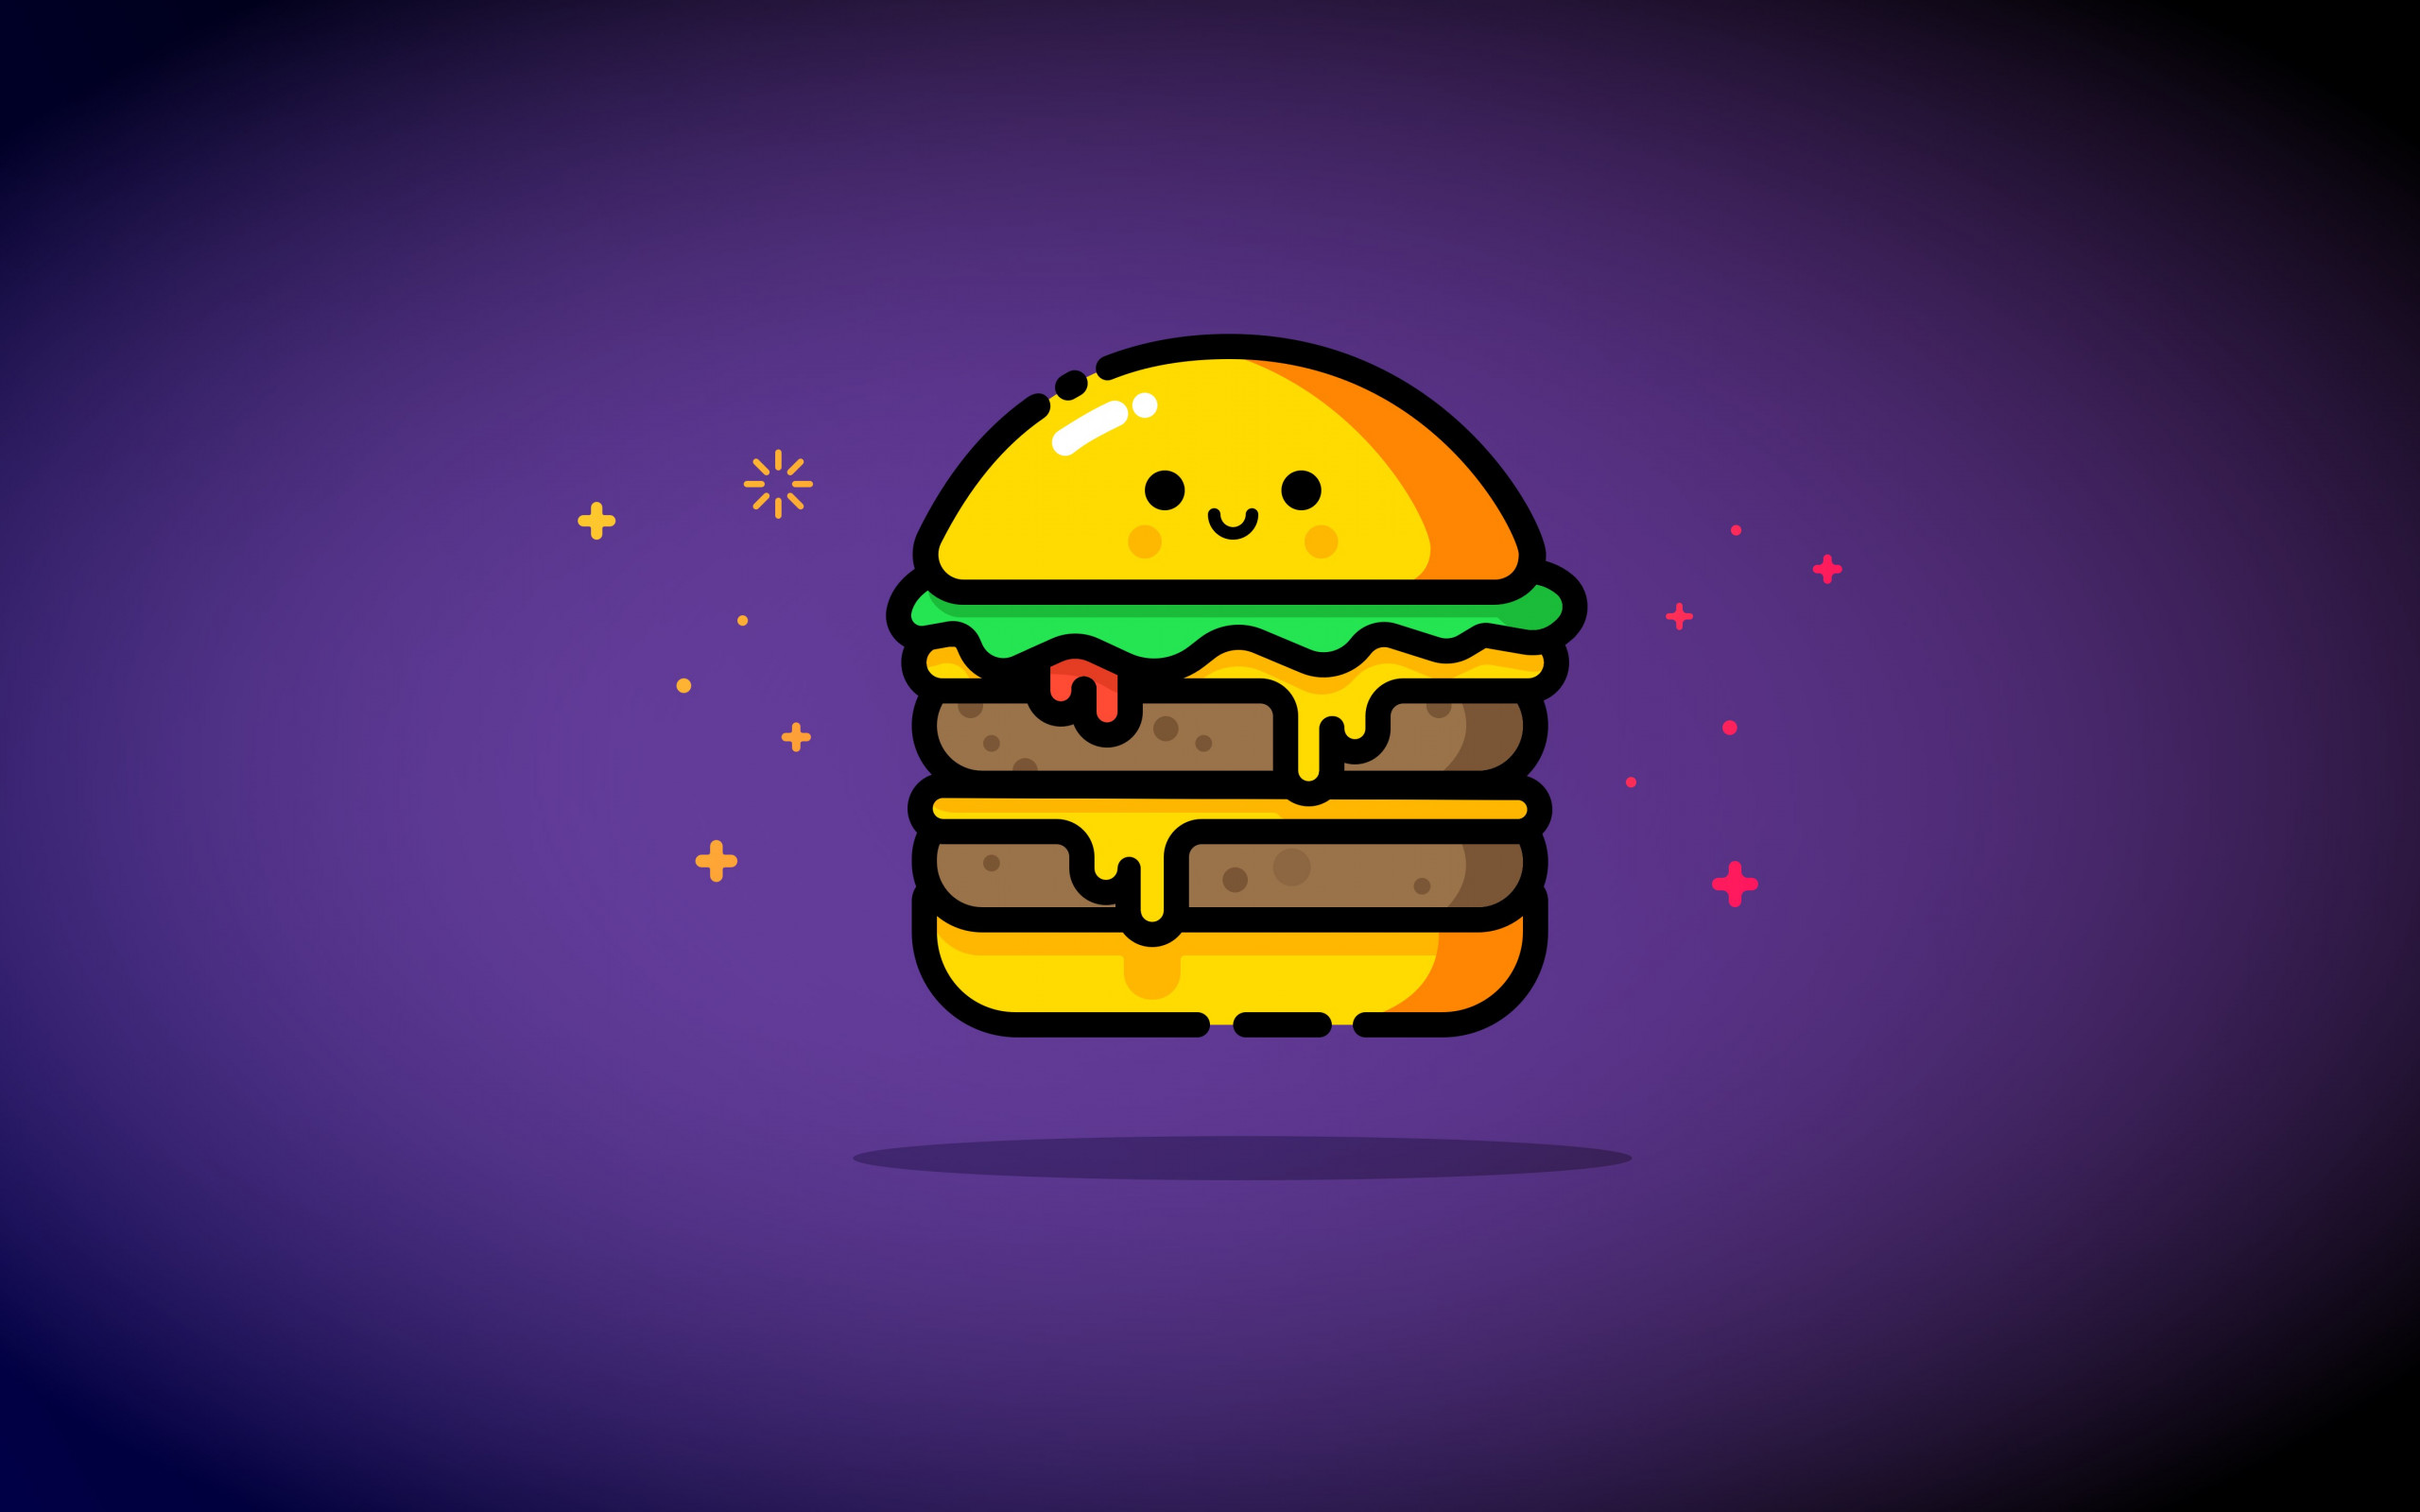 Double cheese wallpaper 2560x1600